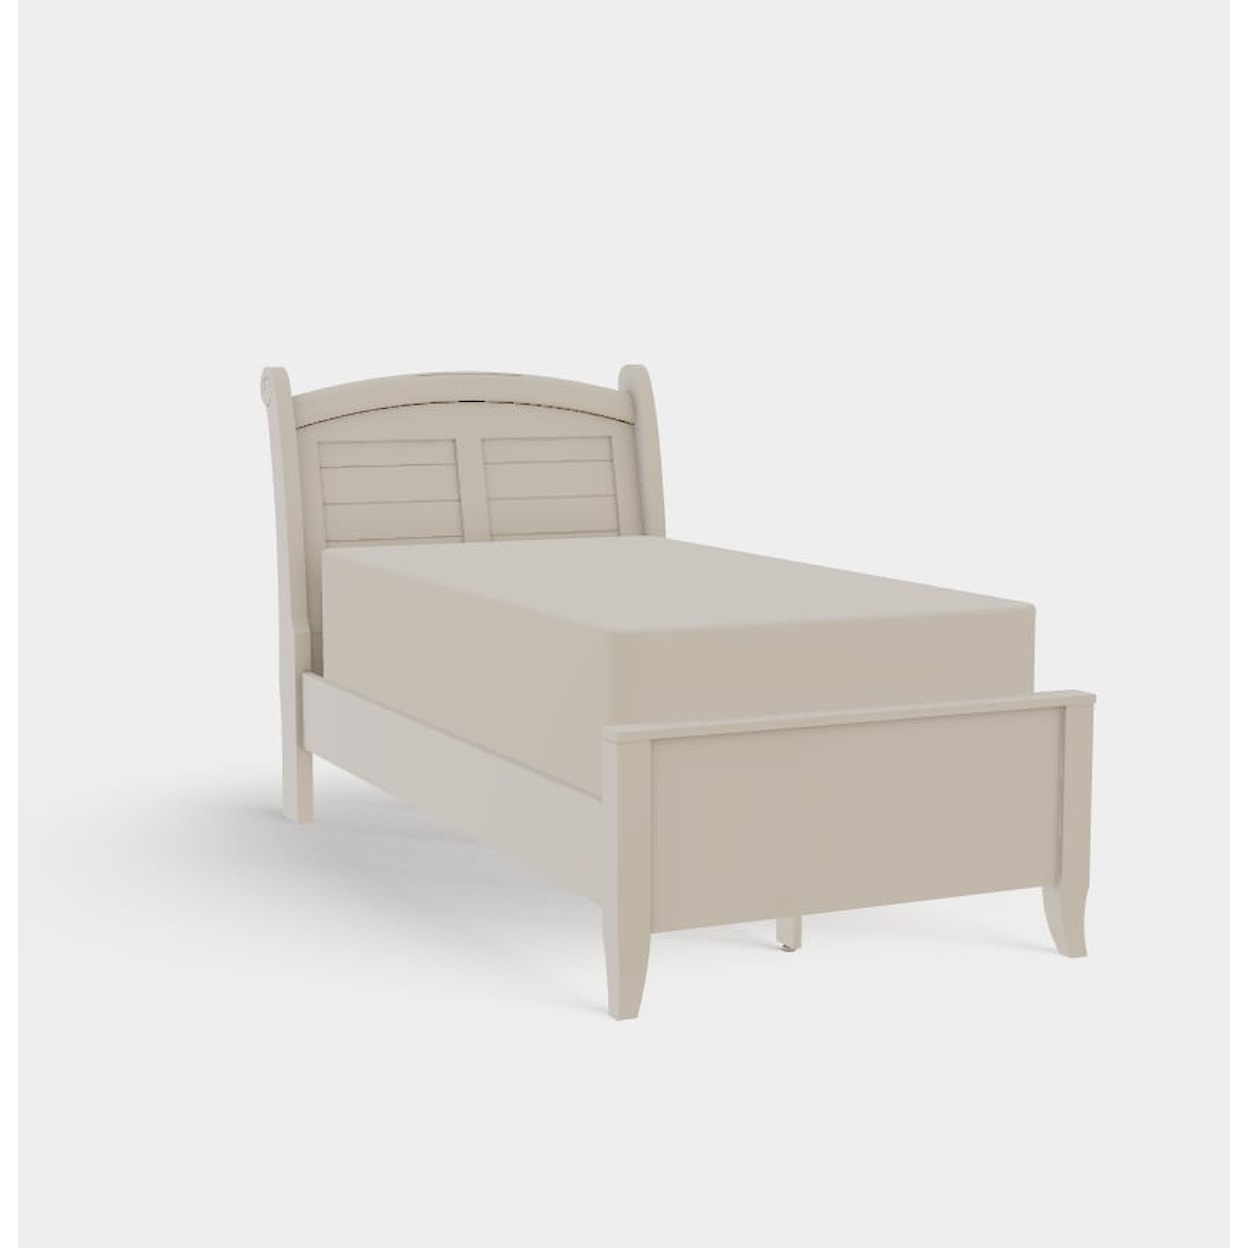 Mavin Tribeca Twin XL Arched Low Footboard Bed